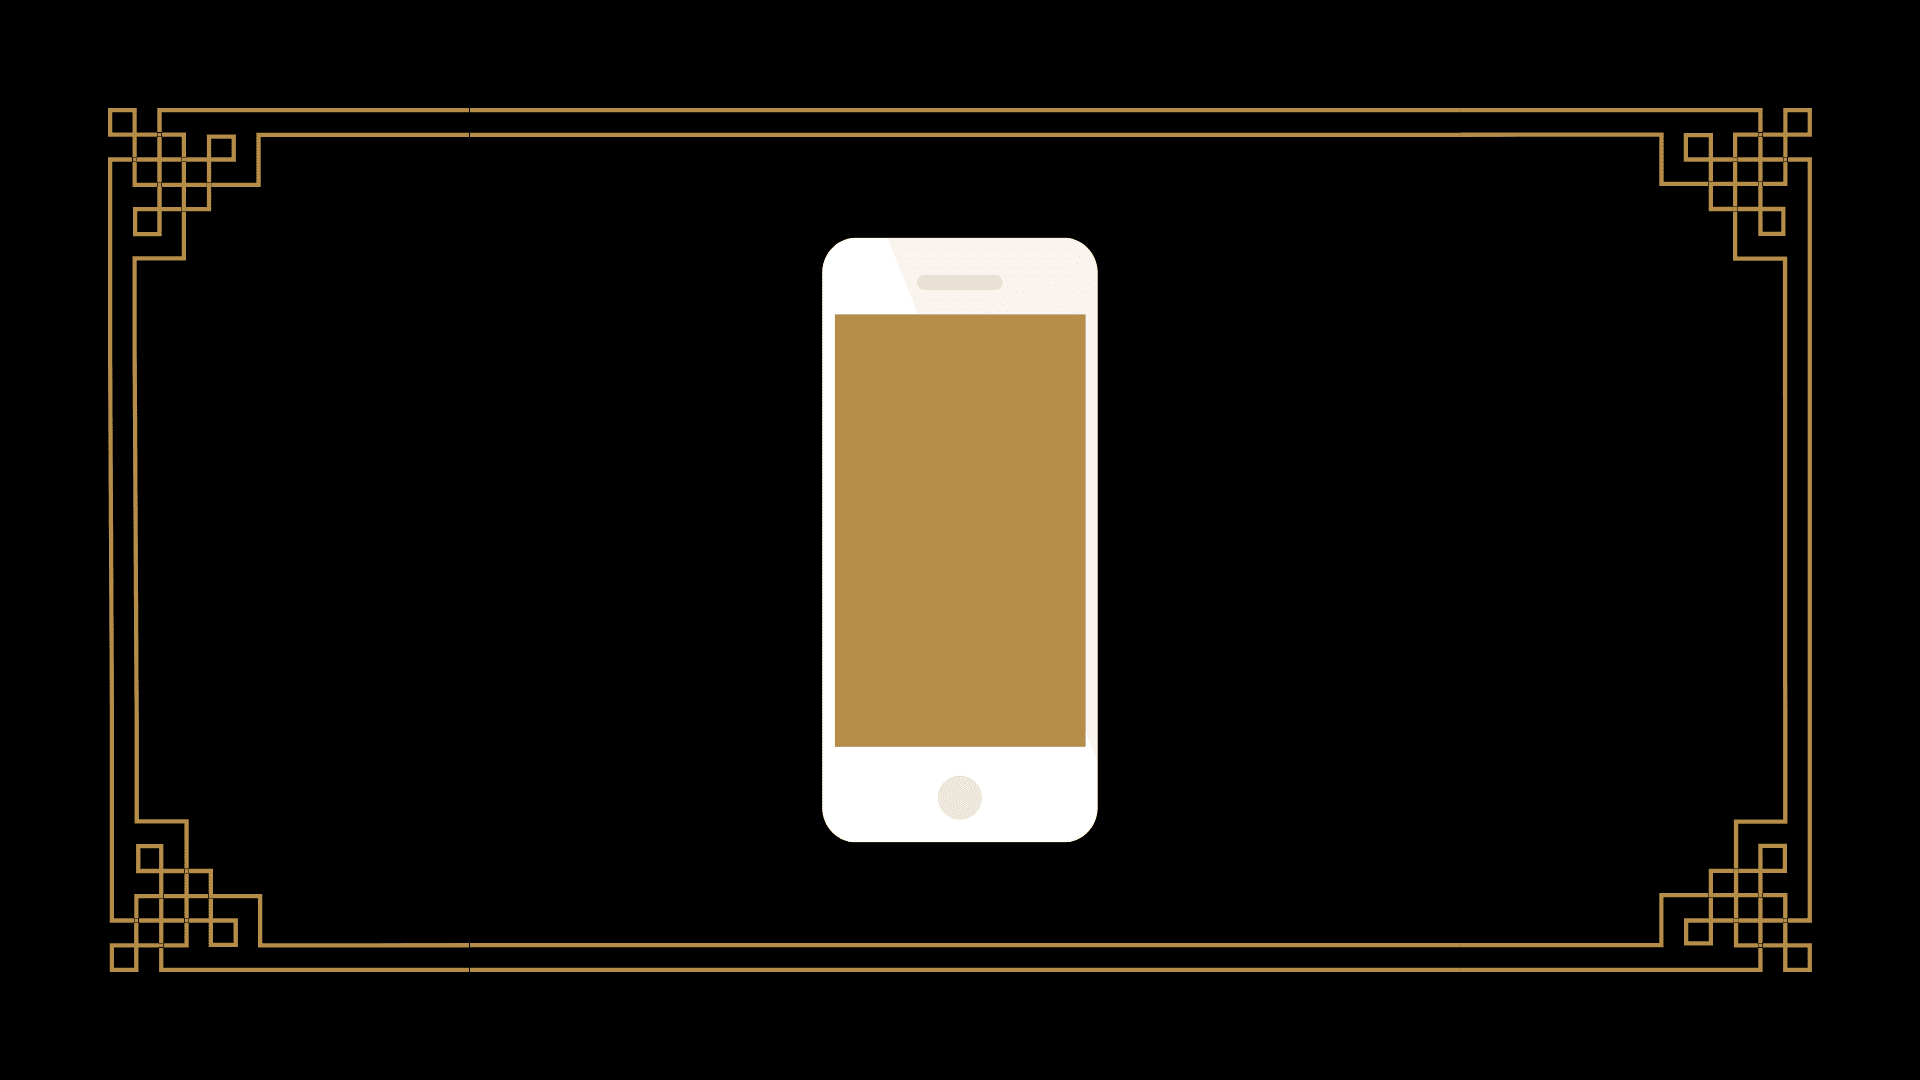 An iphone on a black background with a golden screen.